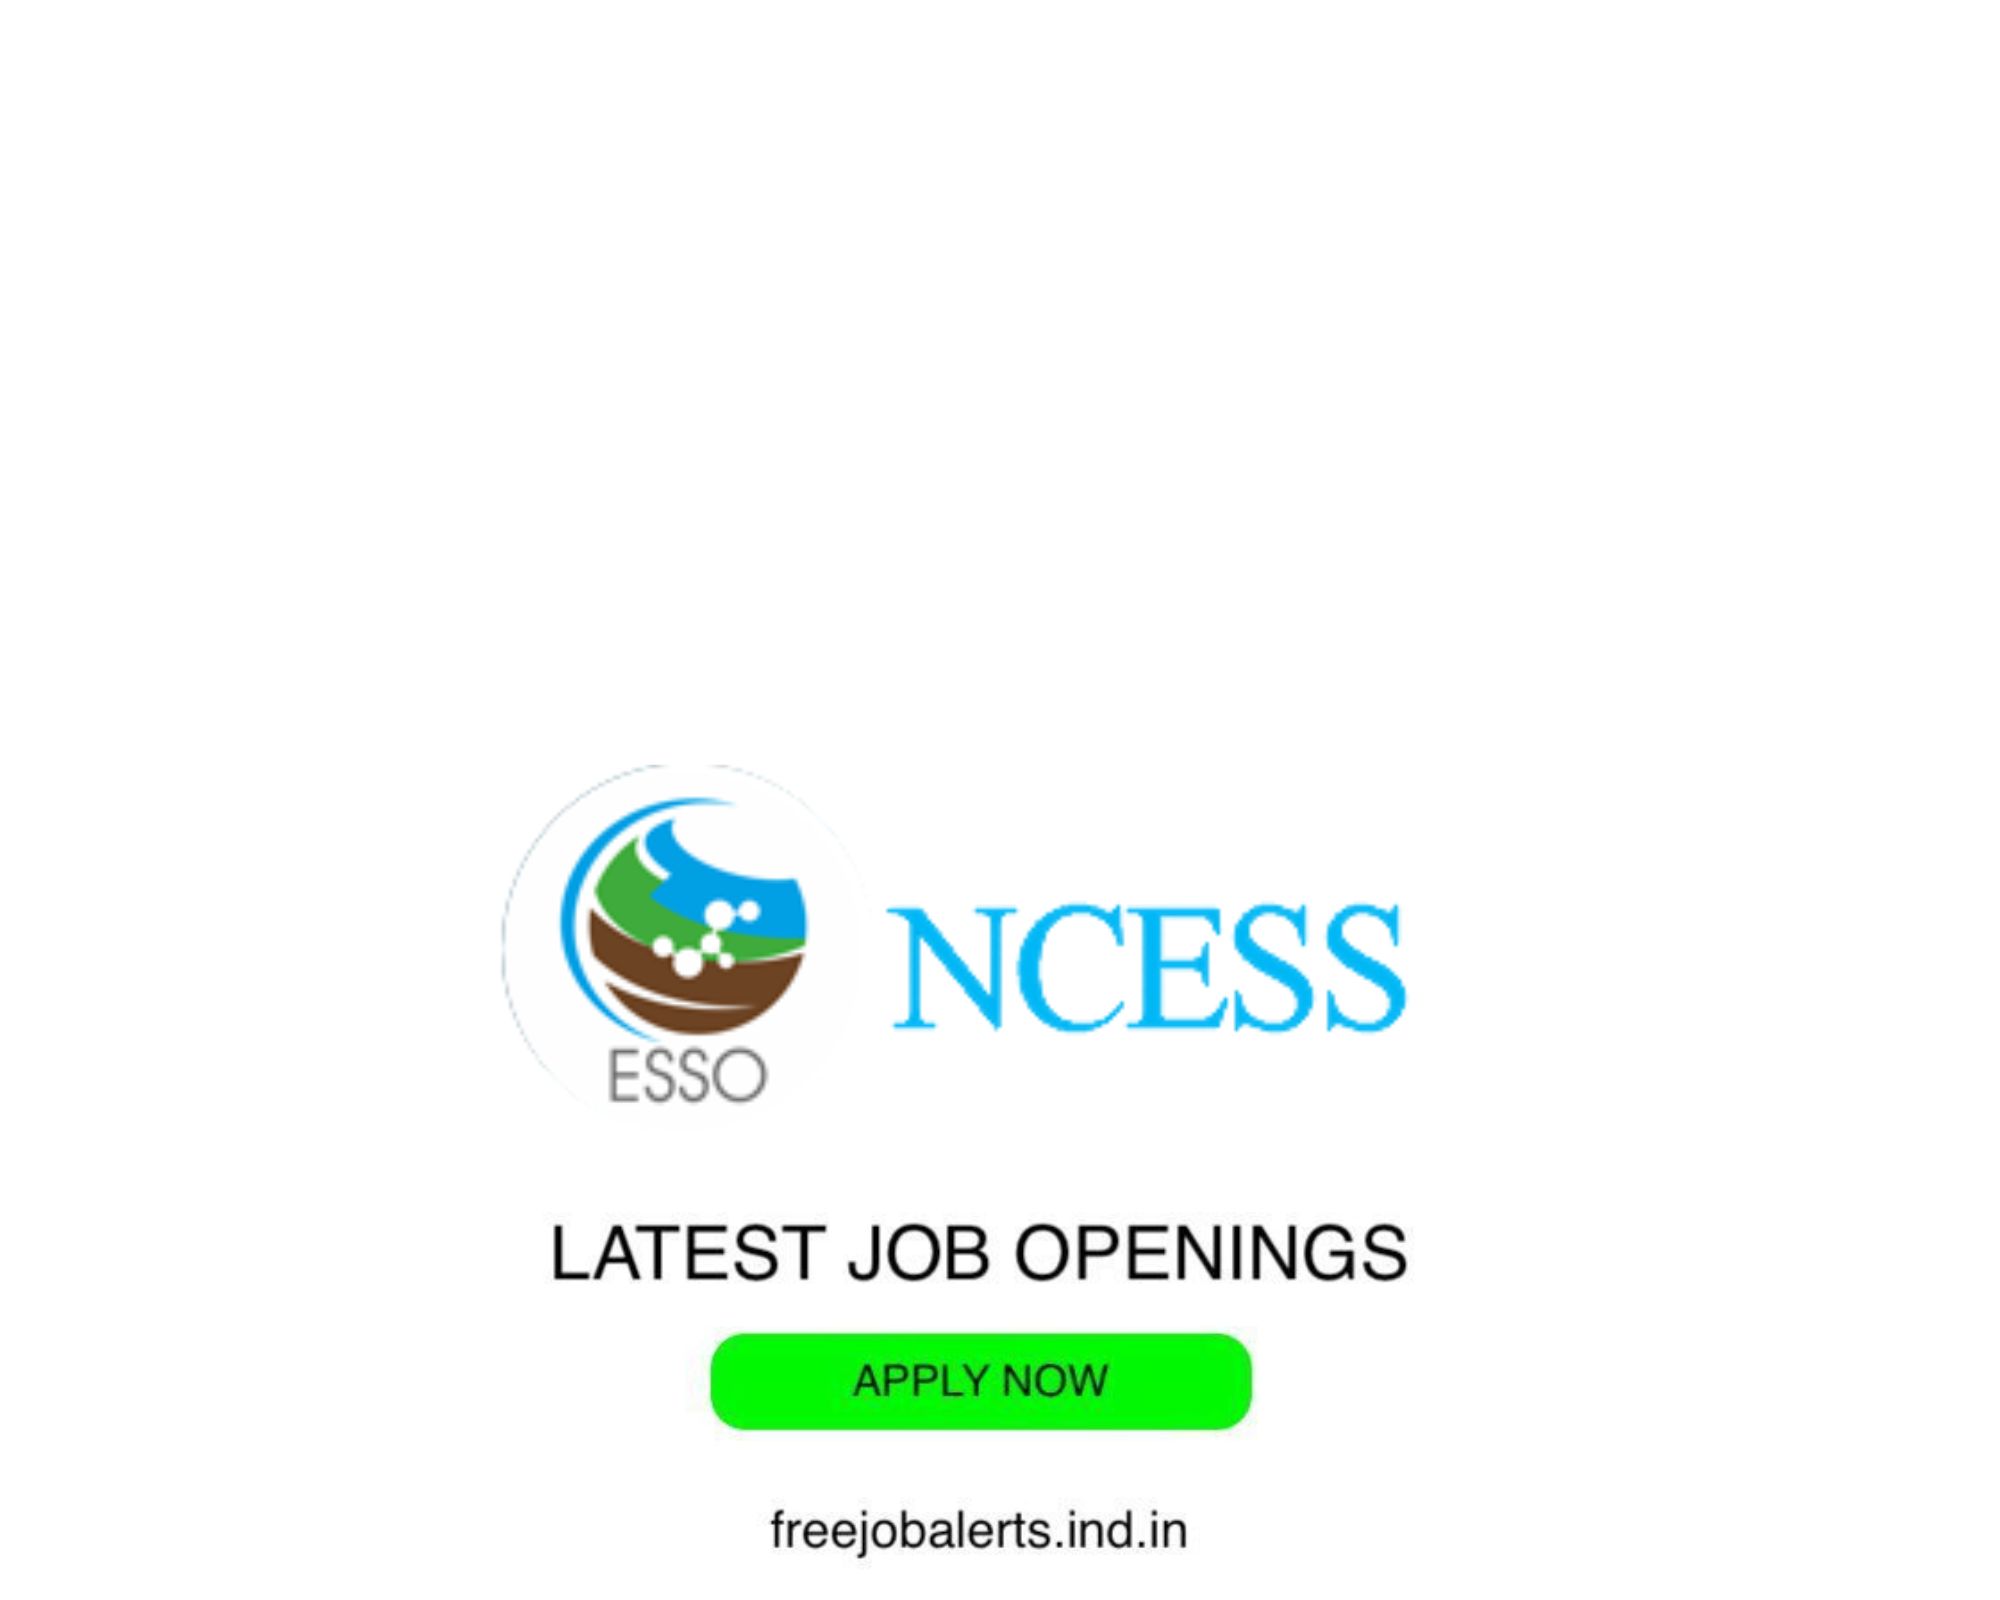 NCESS - National Centre For Earth Science Studies- Latest Govt job openings - Free job alerts, Indian Govt Jobs